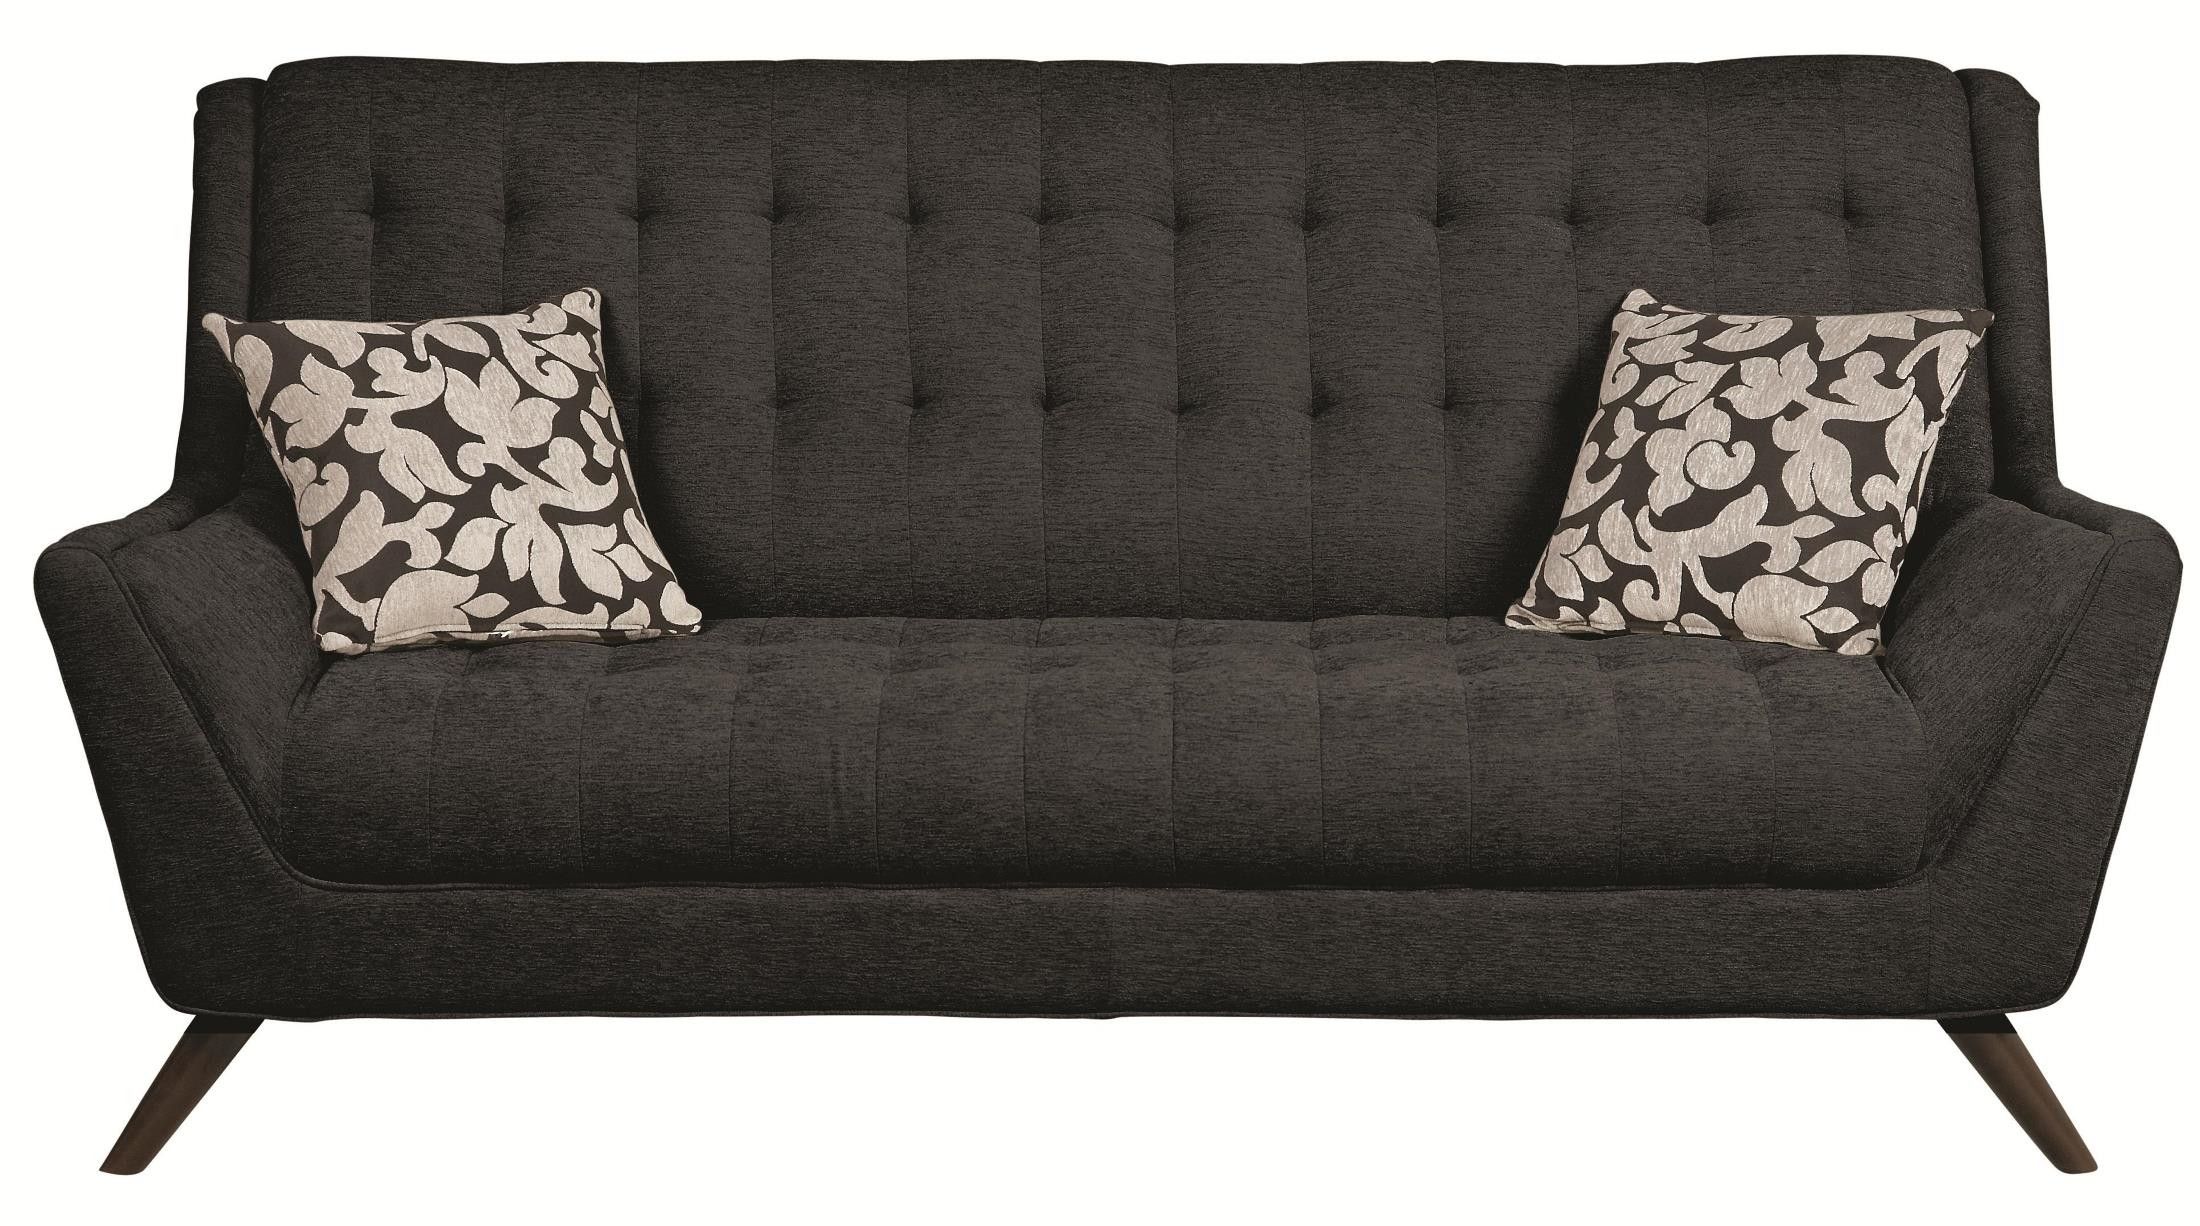 Natalia Black Sofa From Coaster (503774) | Coleman Furniture With Traditional Black Fabric Sofas (Gallery 16 of 21)